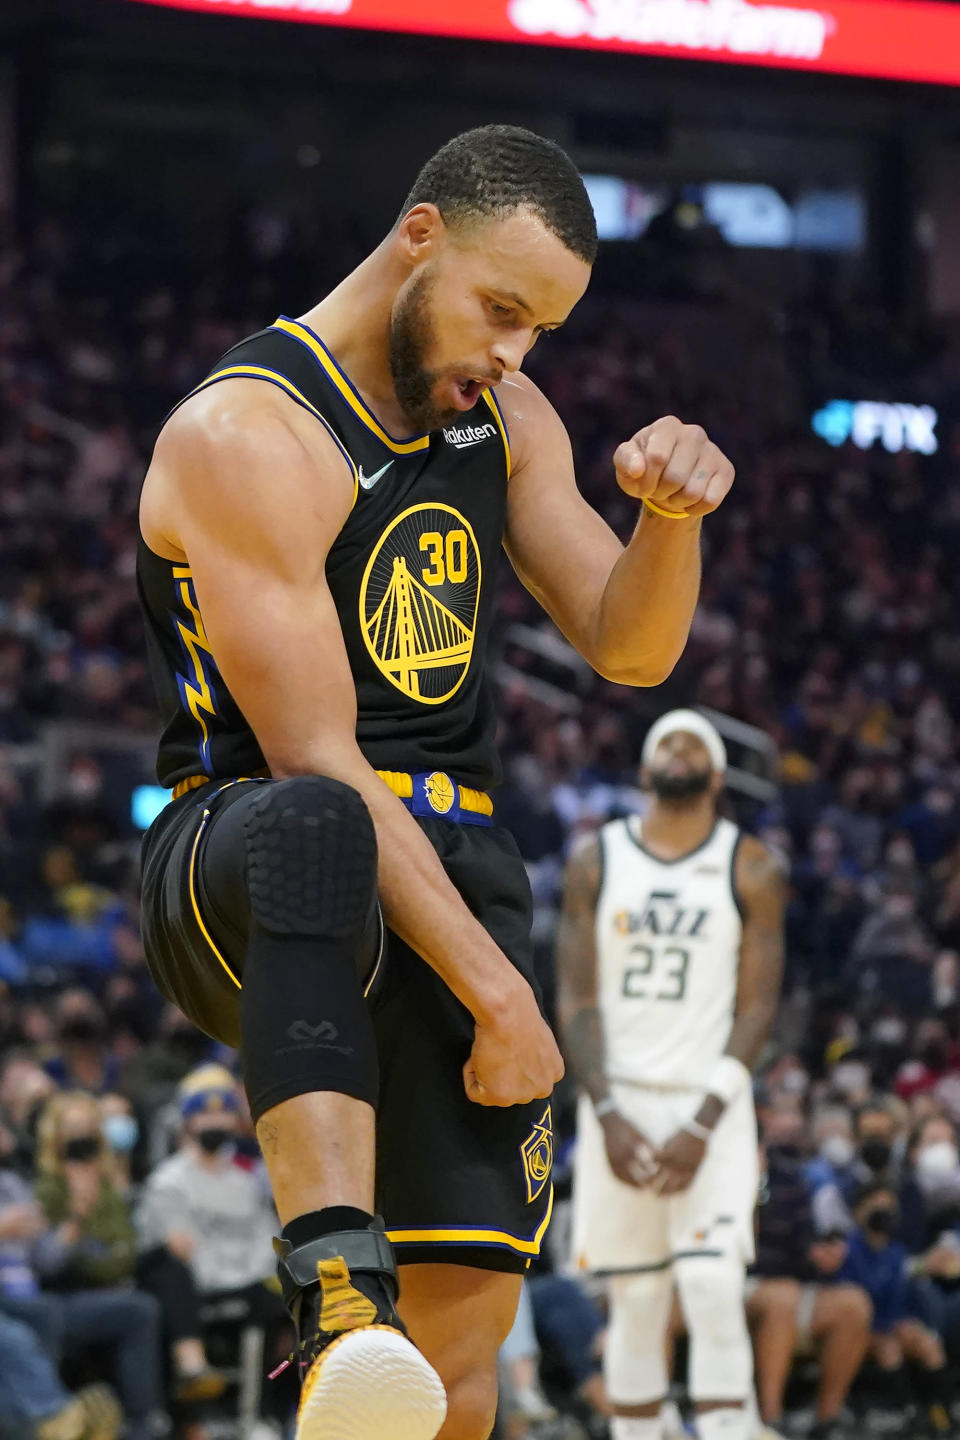 Golden State Warriors guard Stephen Curry celebrates after scoring against the Utah Jazz during the first half of an NBA basketball game in San Francisco, Sunday, Jan. 23, 2022. (AP Photo/Jeff Chiu)